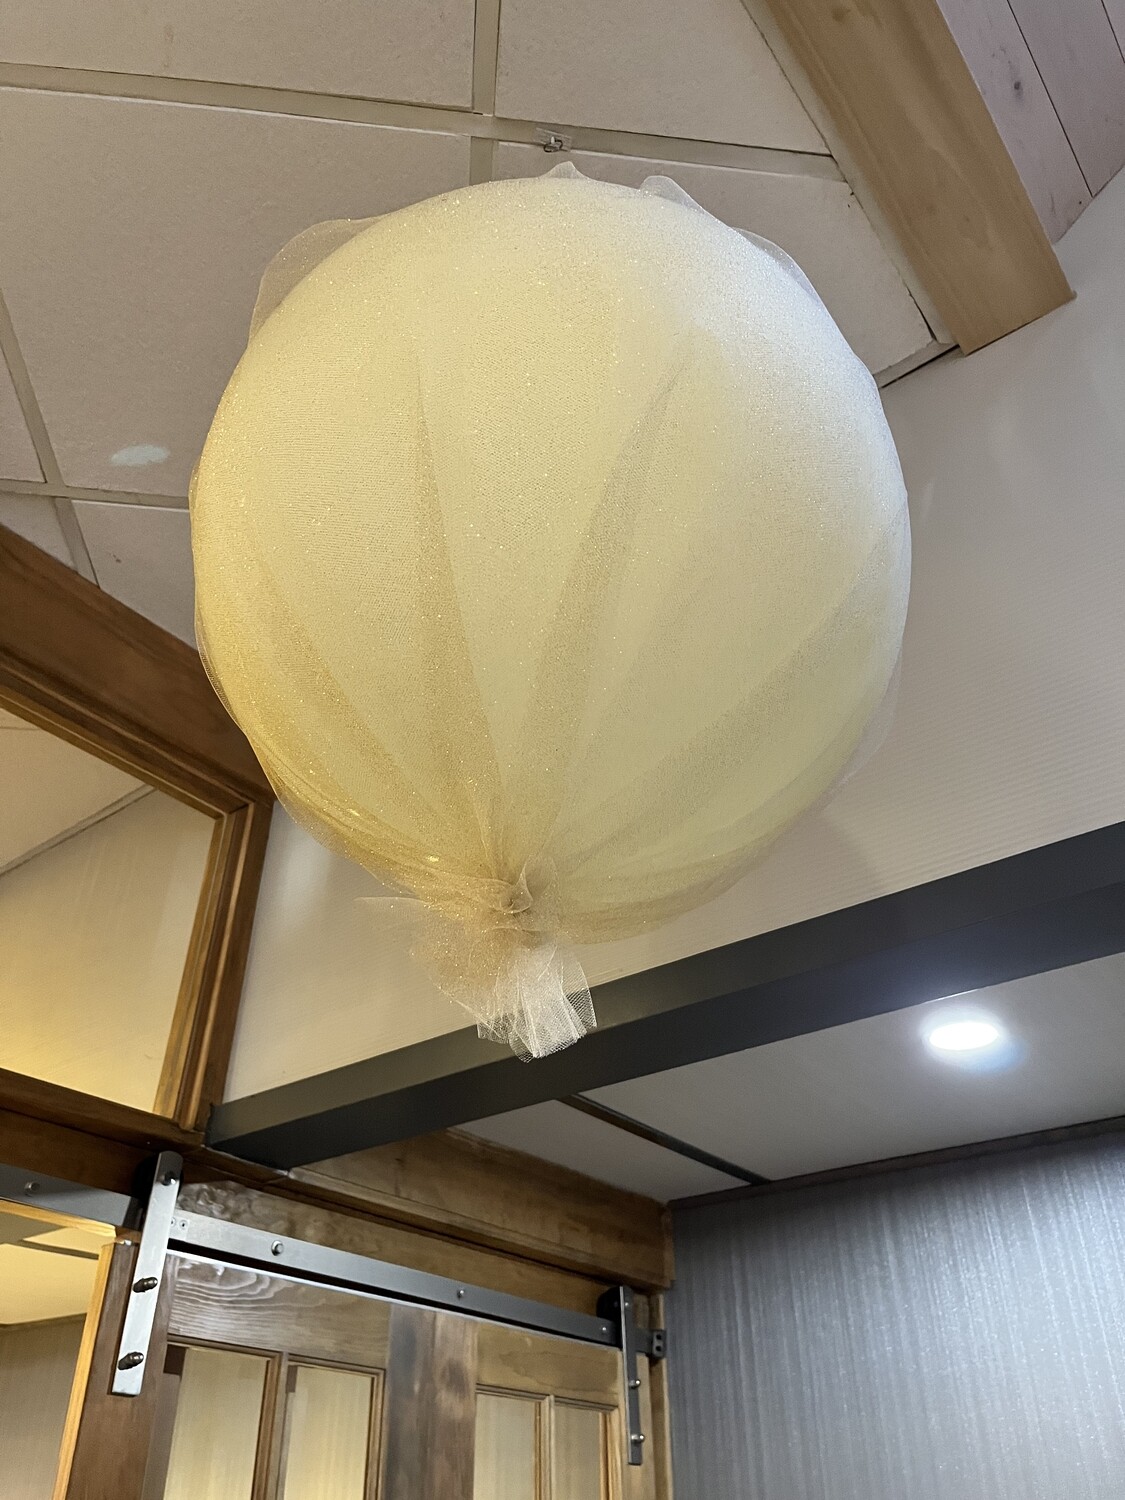 Elegant balloon chandeliers with tulle